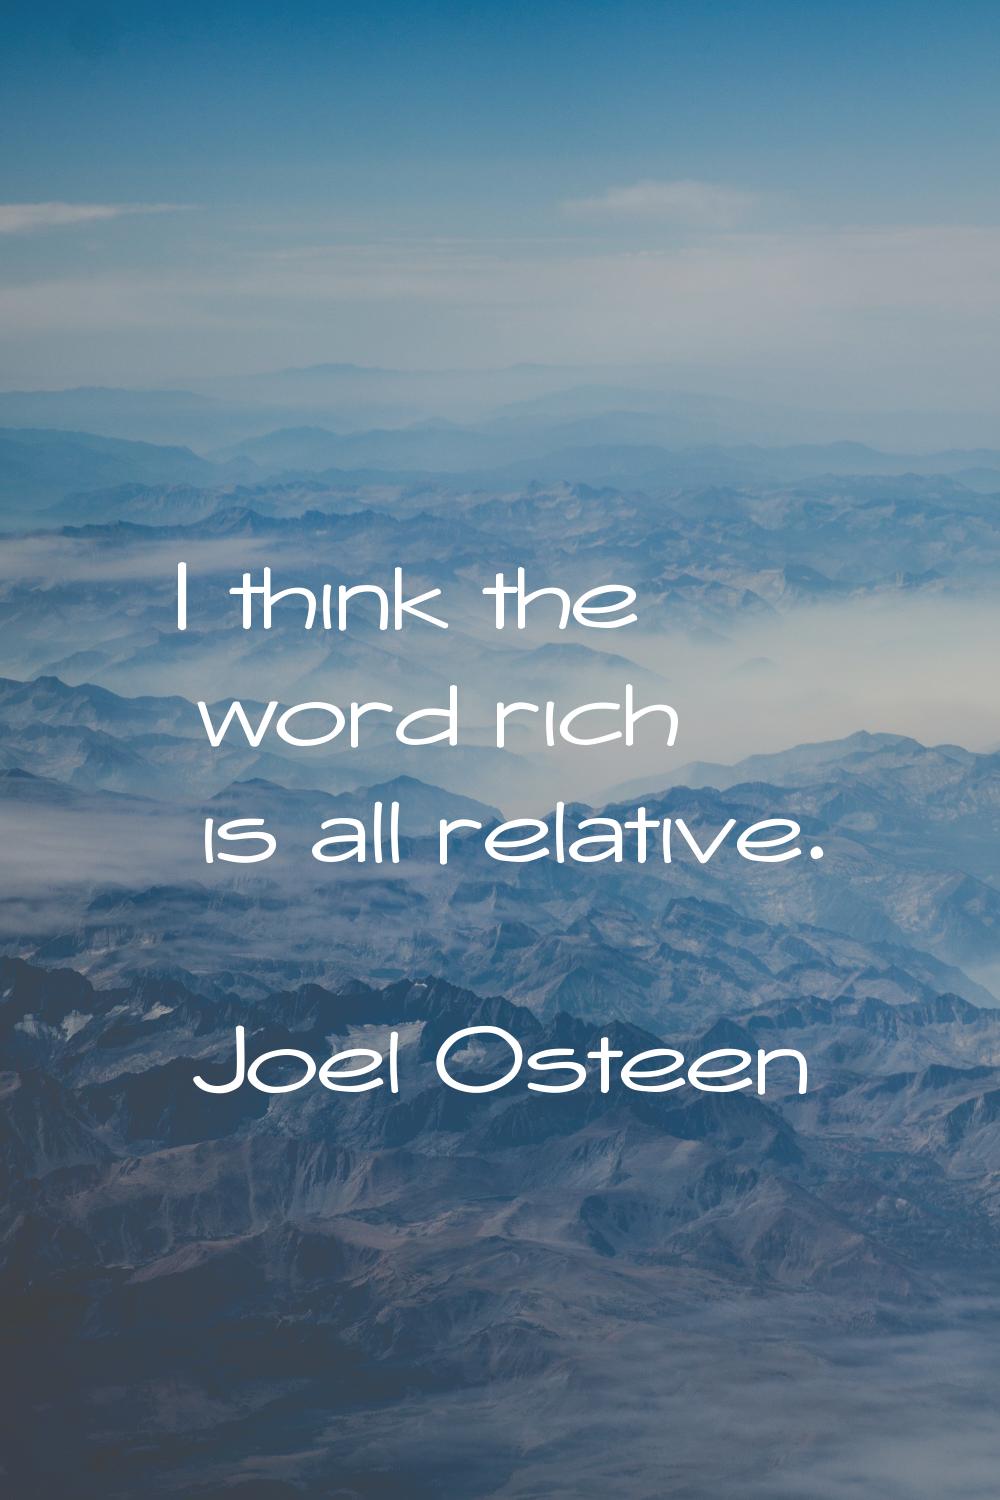 I think the word rich is all relative.